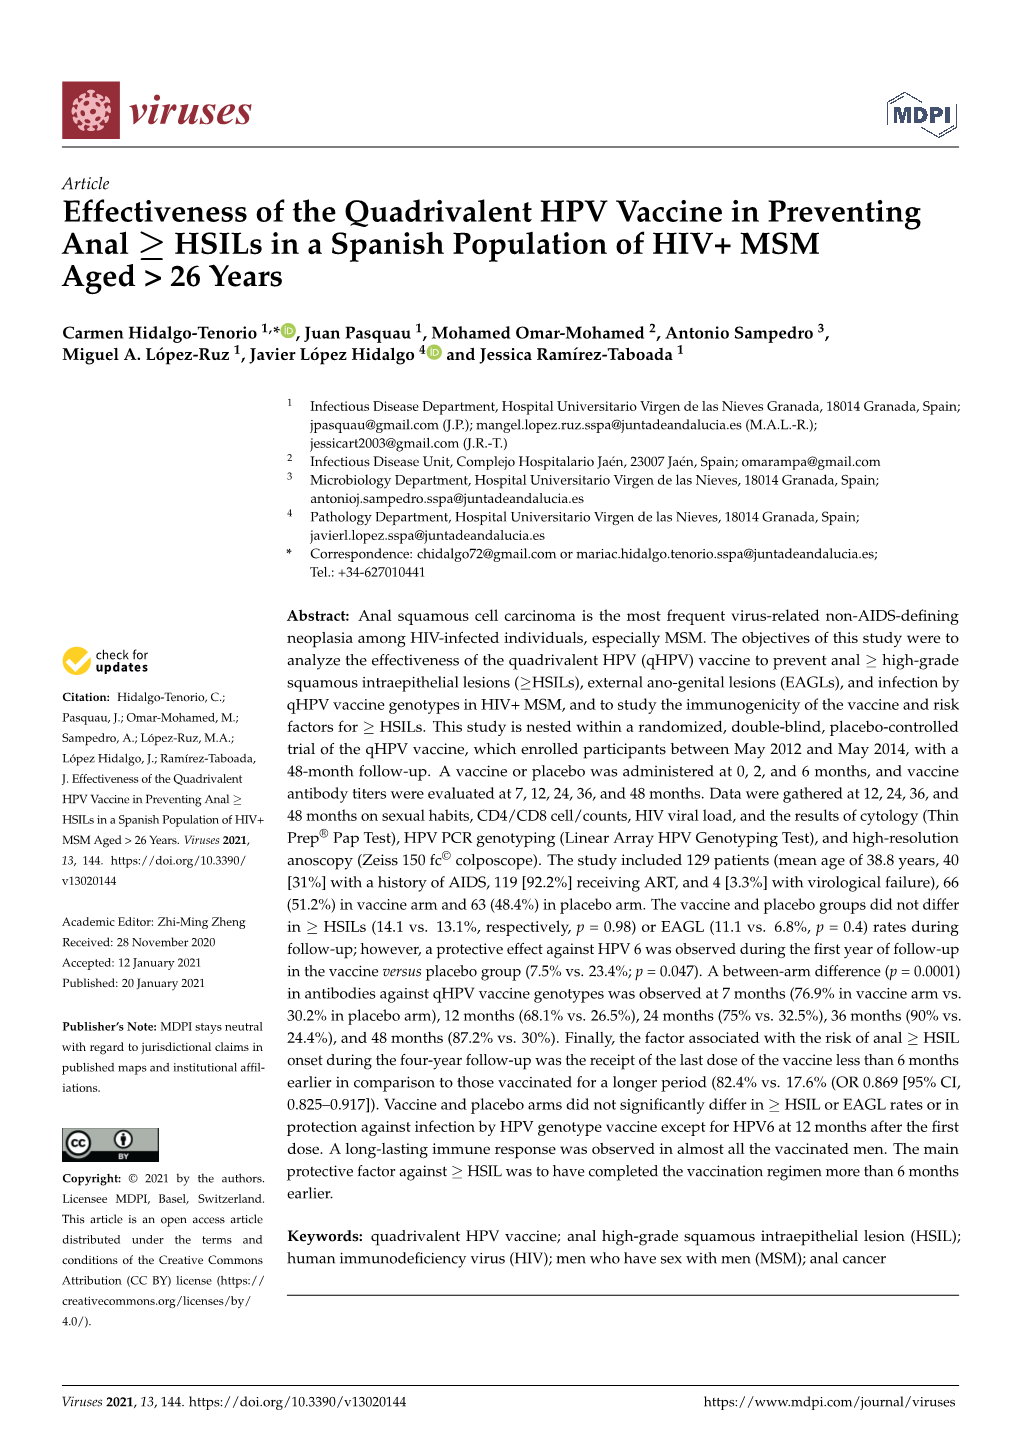 Effectiveness of the Quadrivalent HPV Vaccine in Preventing Anal Hsils